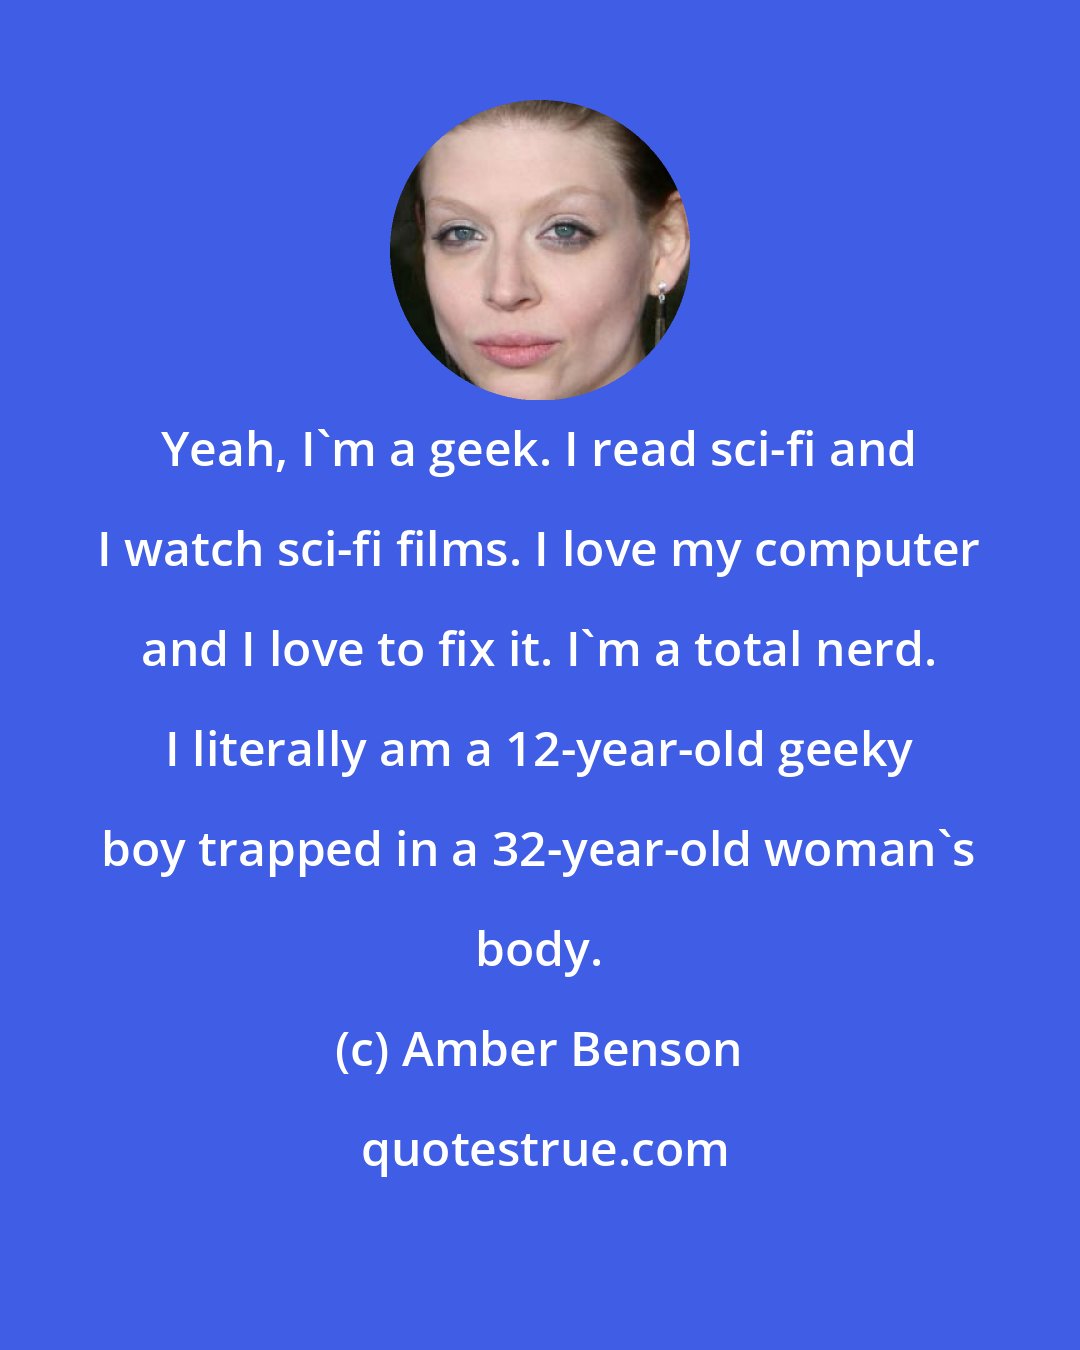 Amber Benson: Yeah, I'm a geek. I read sci-fi and I watch sci-fi films. I love my computer and I love to fix it. I'm a total nerd. I literally am a 12-year-old geeky boy trapped in a 32-year-old woman's body.